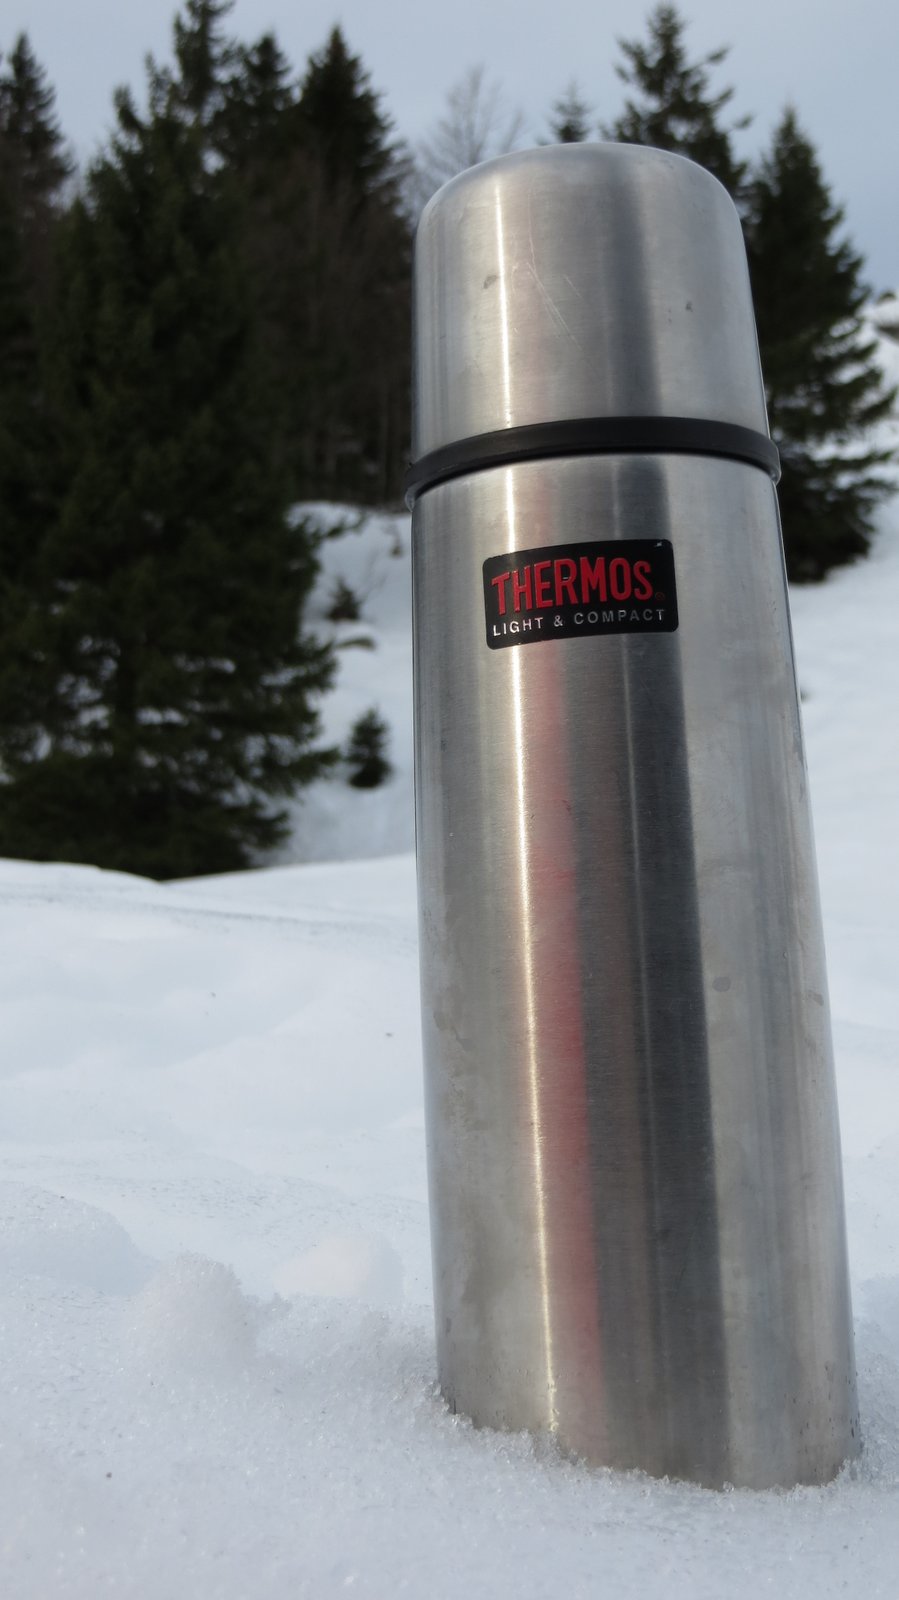 Thermos light & compact